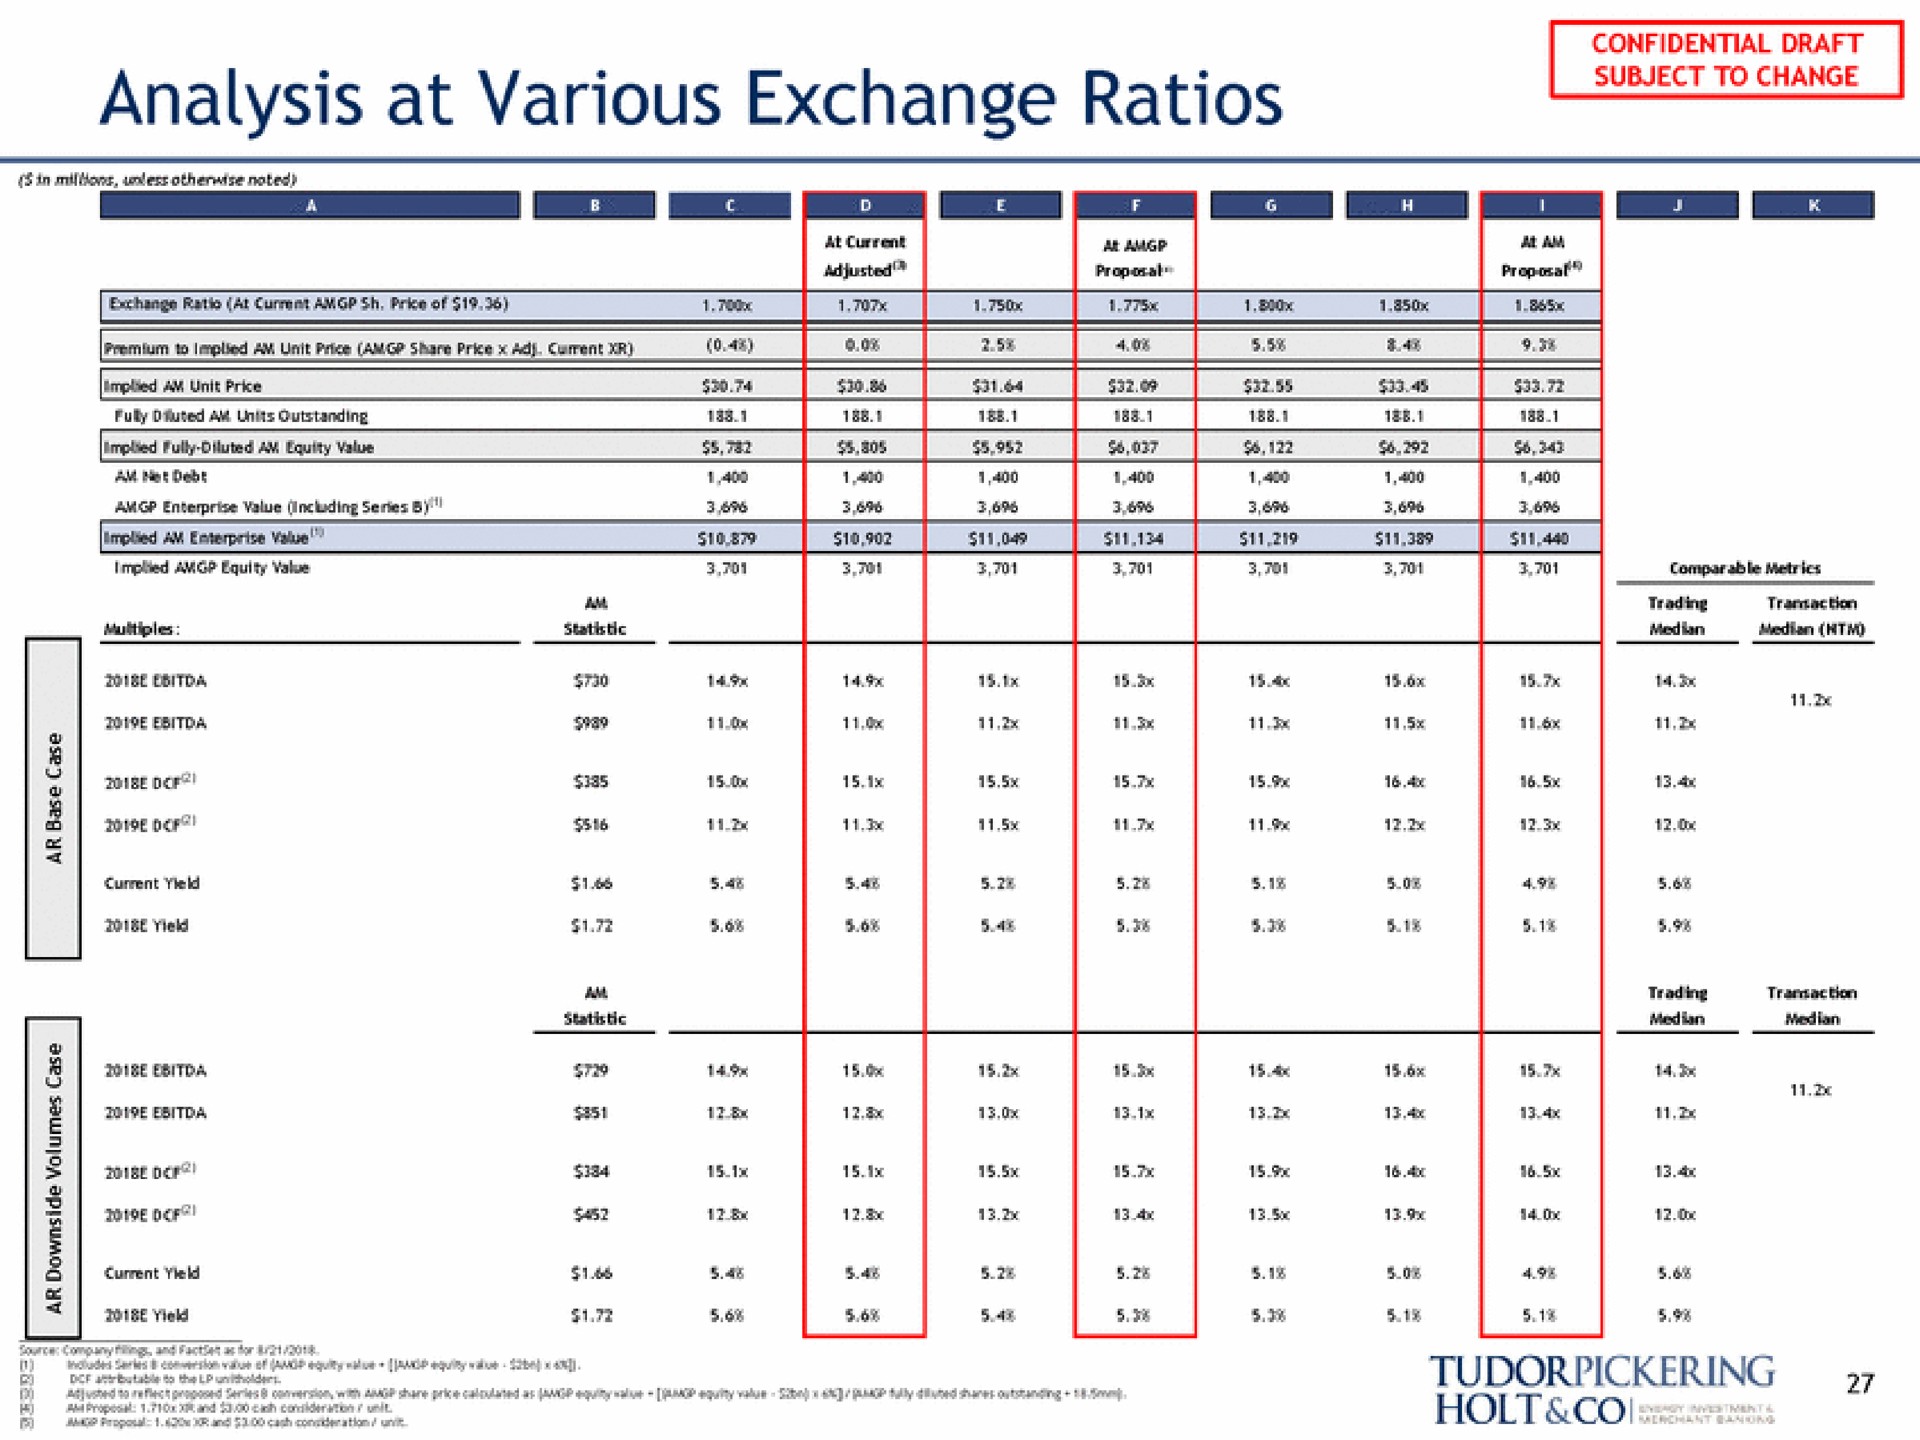 analysis at various exchange ratios see | Tudor, Pickering, Holt & Co